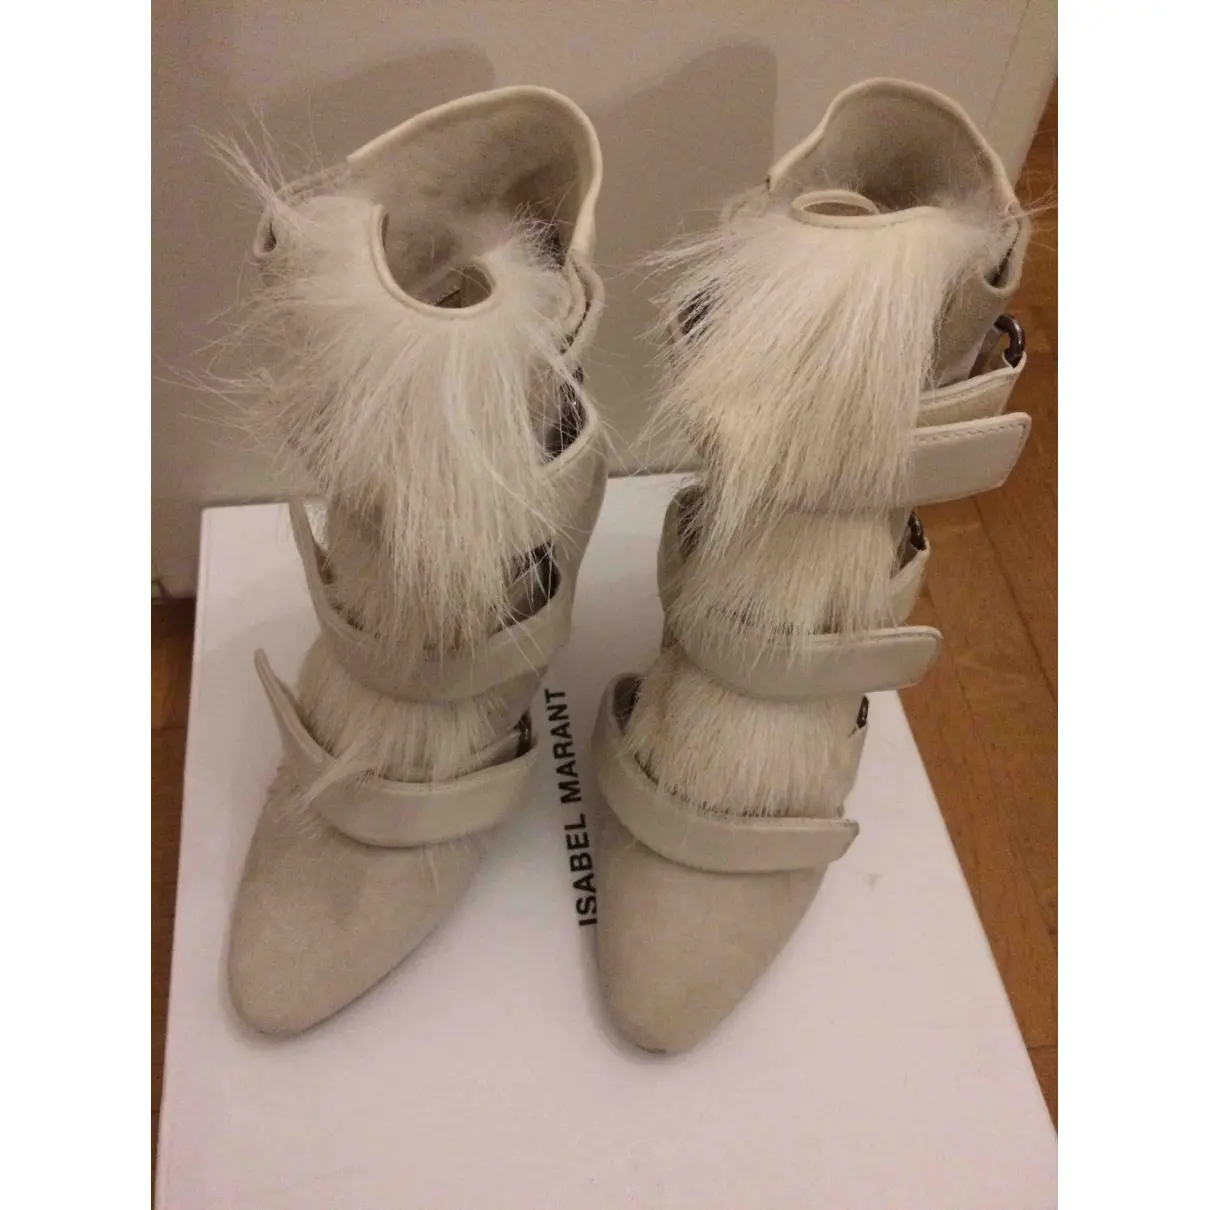 Buy Isabel Marant Leather ankle boots online